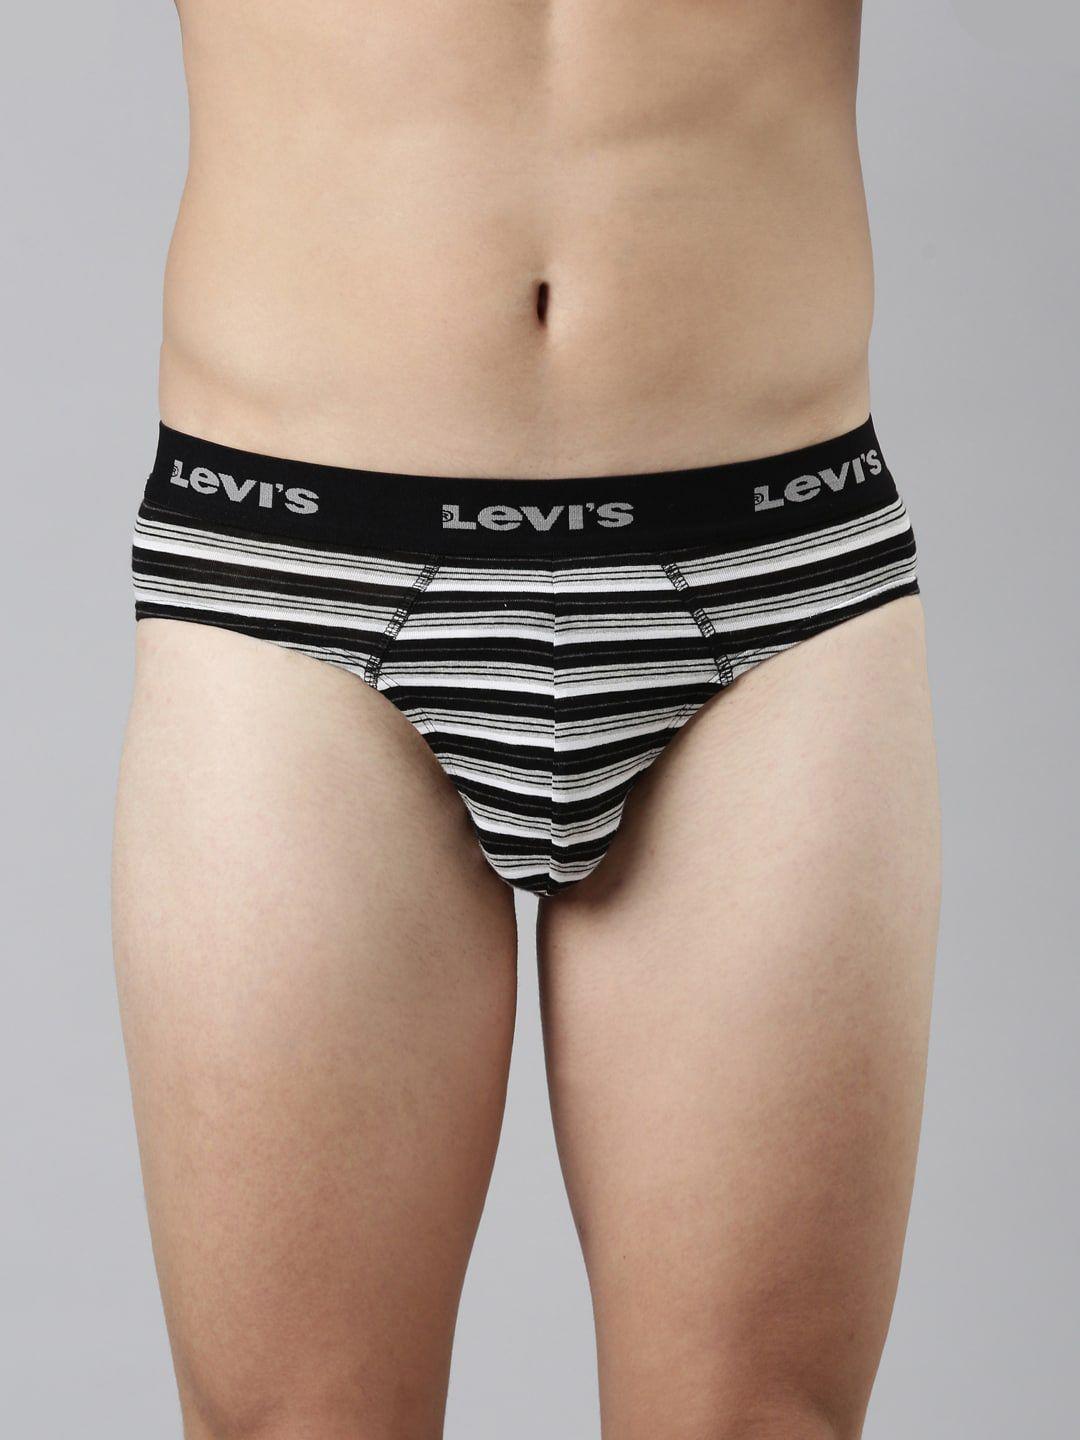 levis-striped-anti-bacterial-cotton-basic-brief